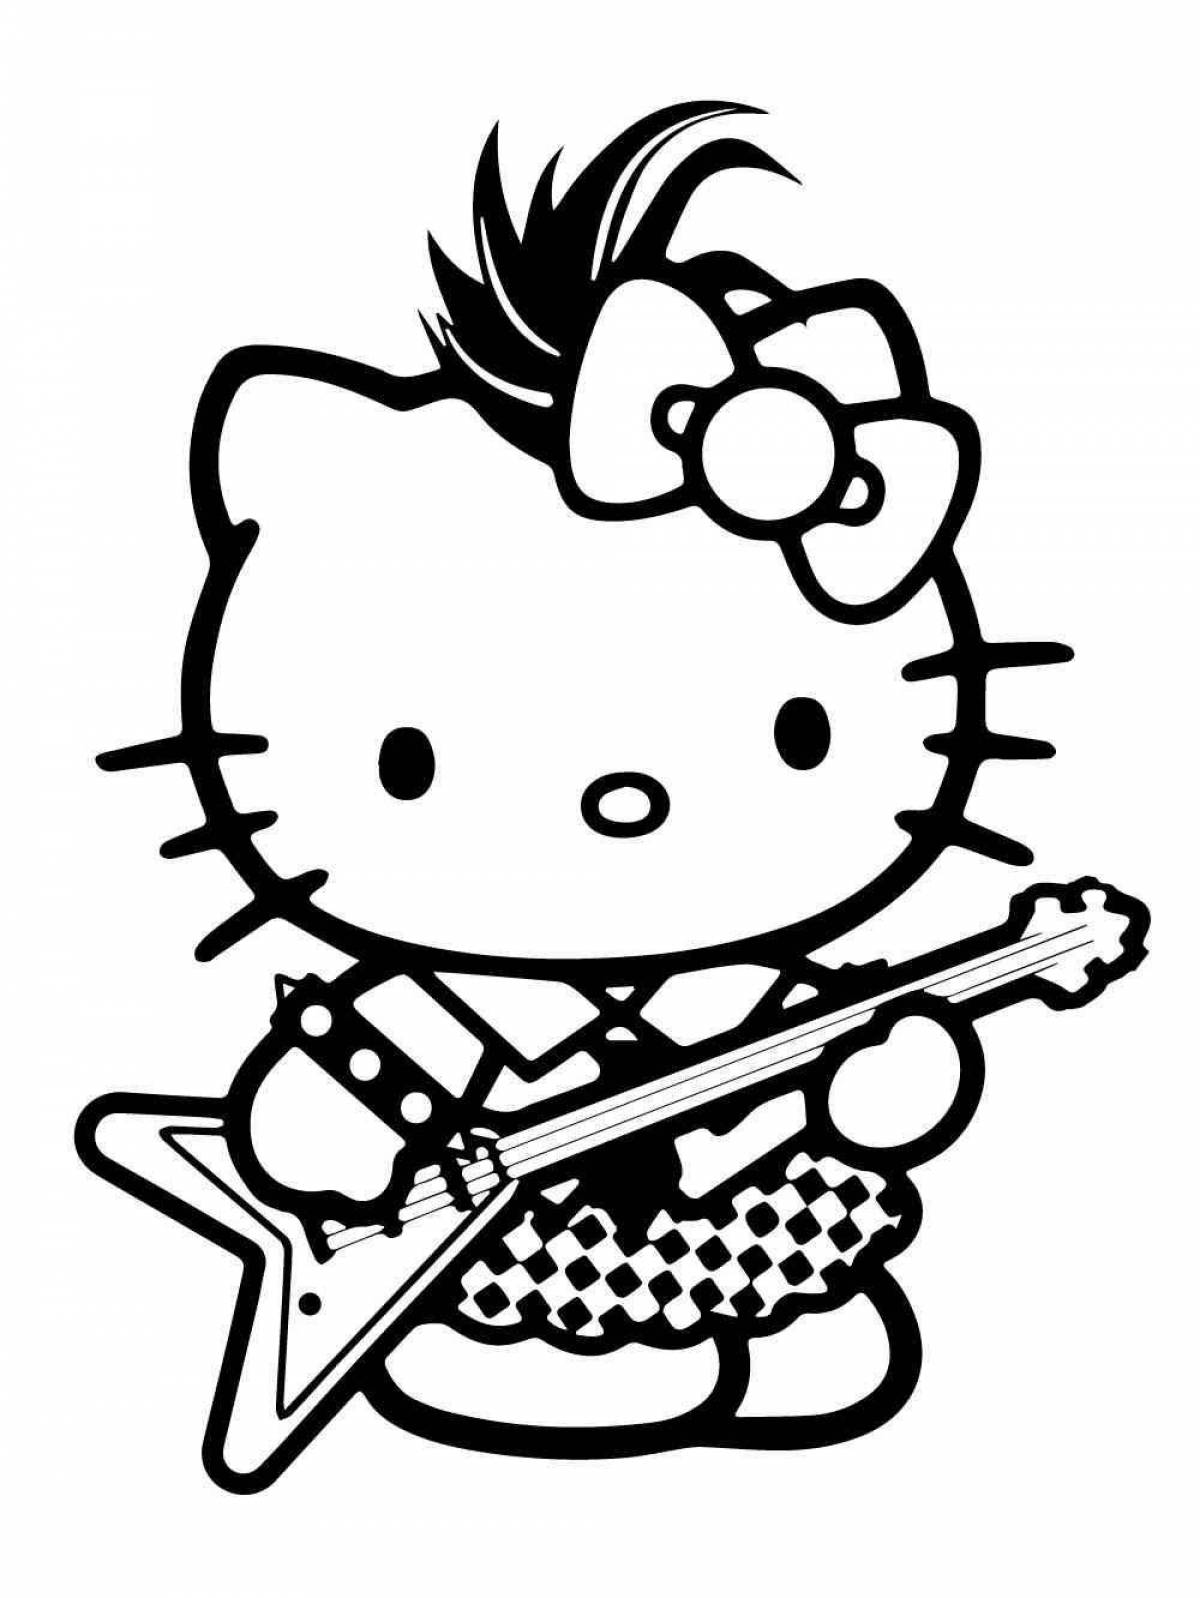 Appeal to hello kitty with a gun